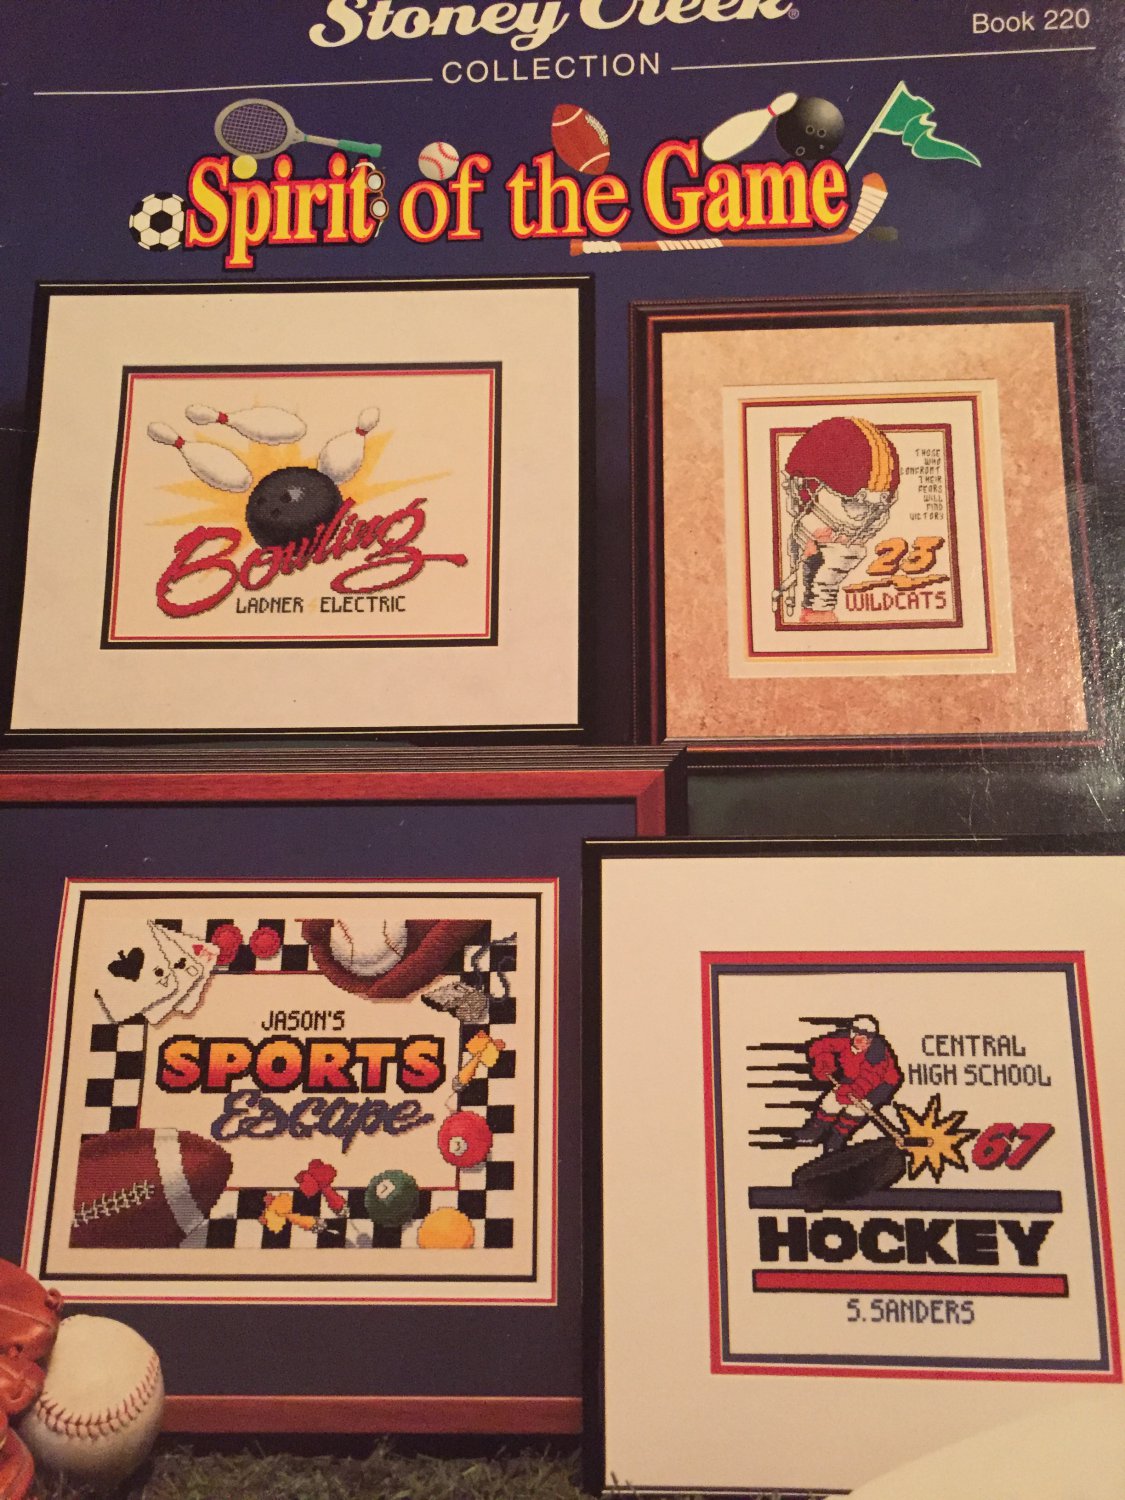 Stoney Creek Collection Spirit of the Game Book 220 Cross Stitch charts for Sports